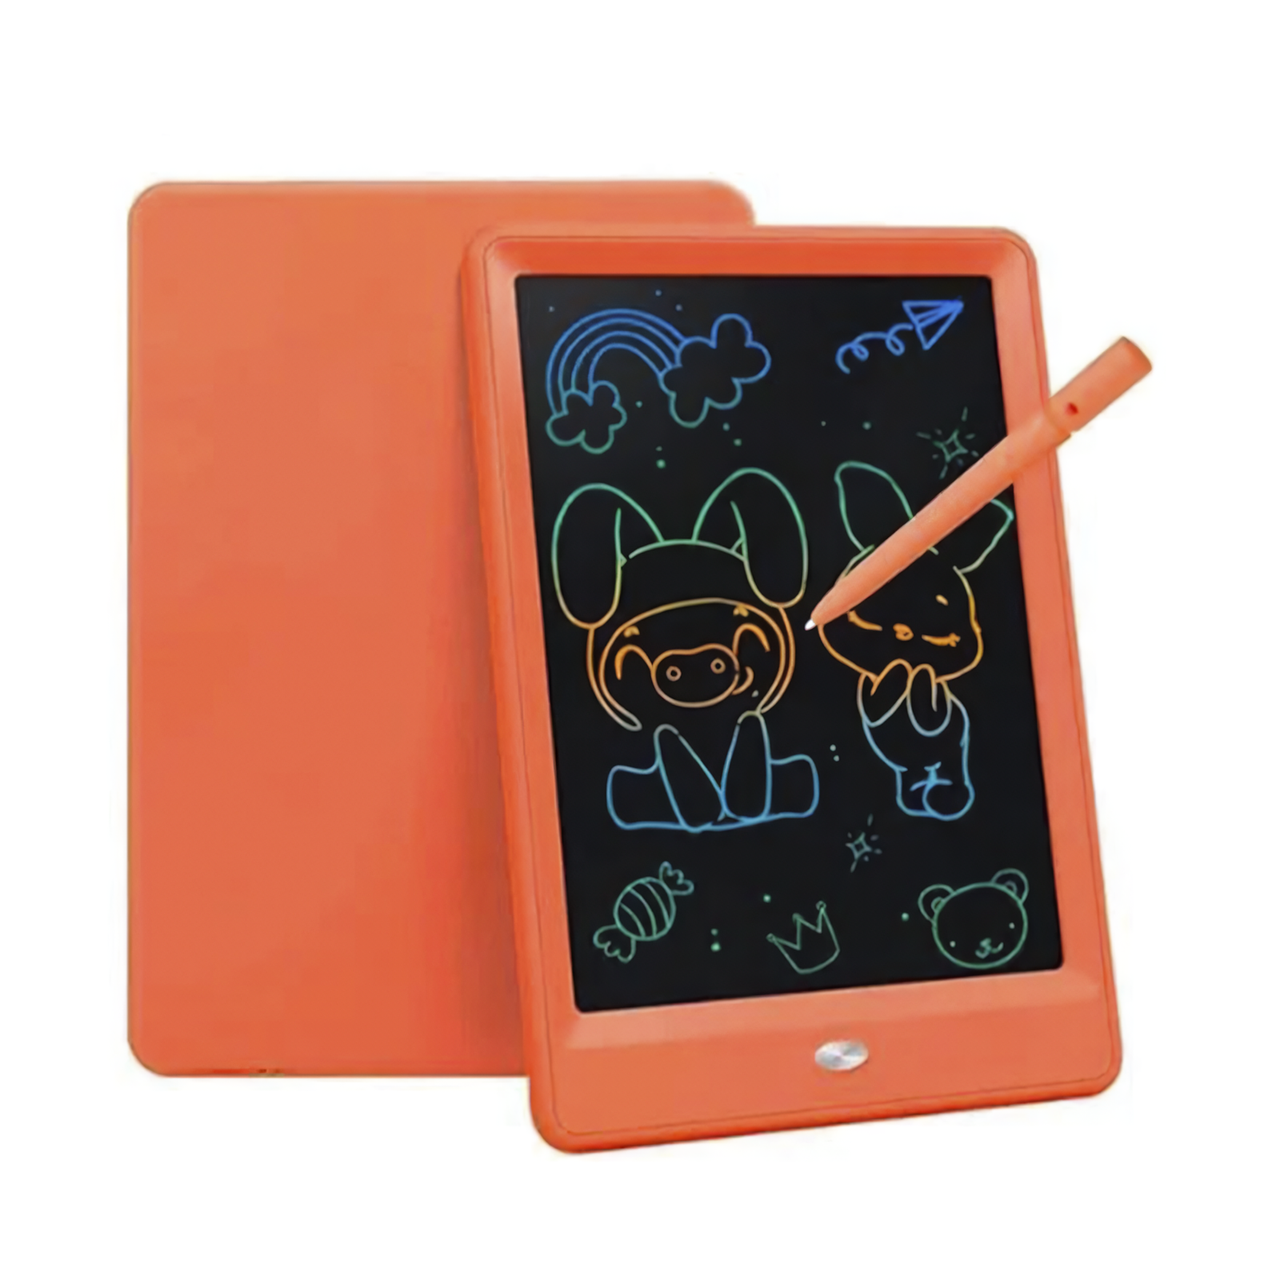 Do these LCD Drawing Toys count as screen time? : r